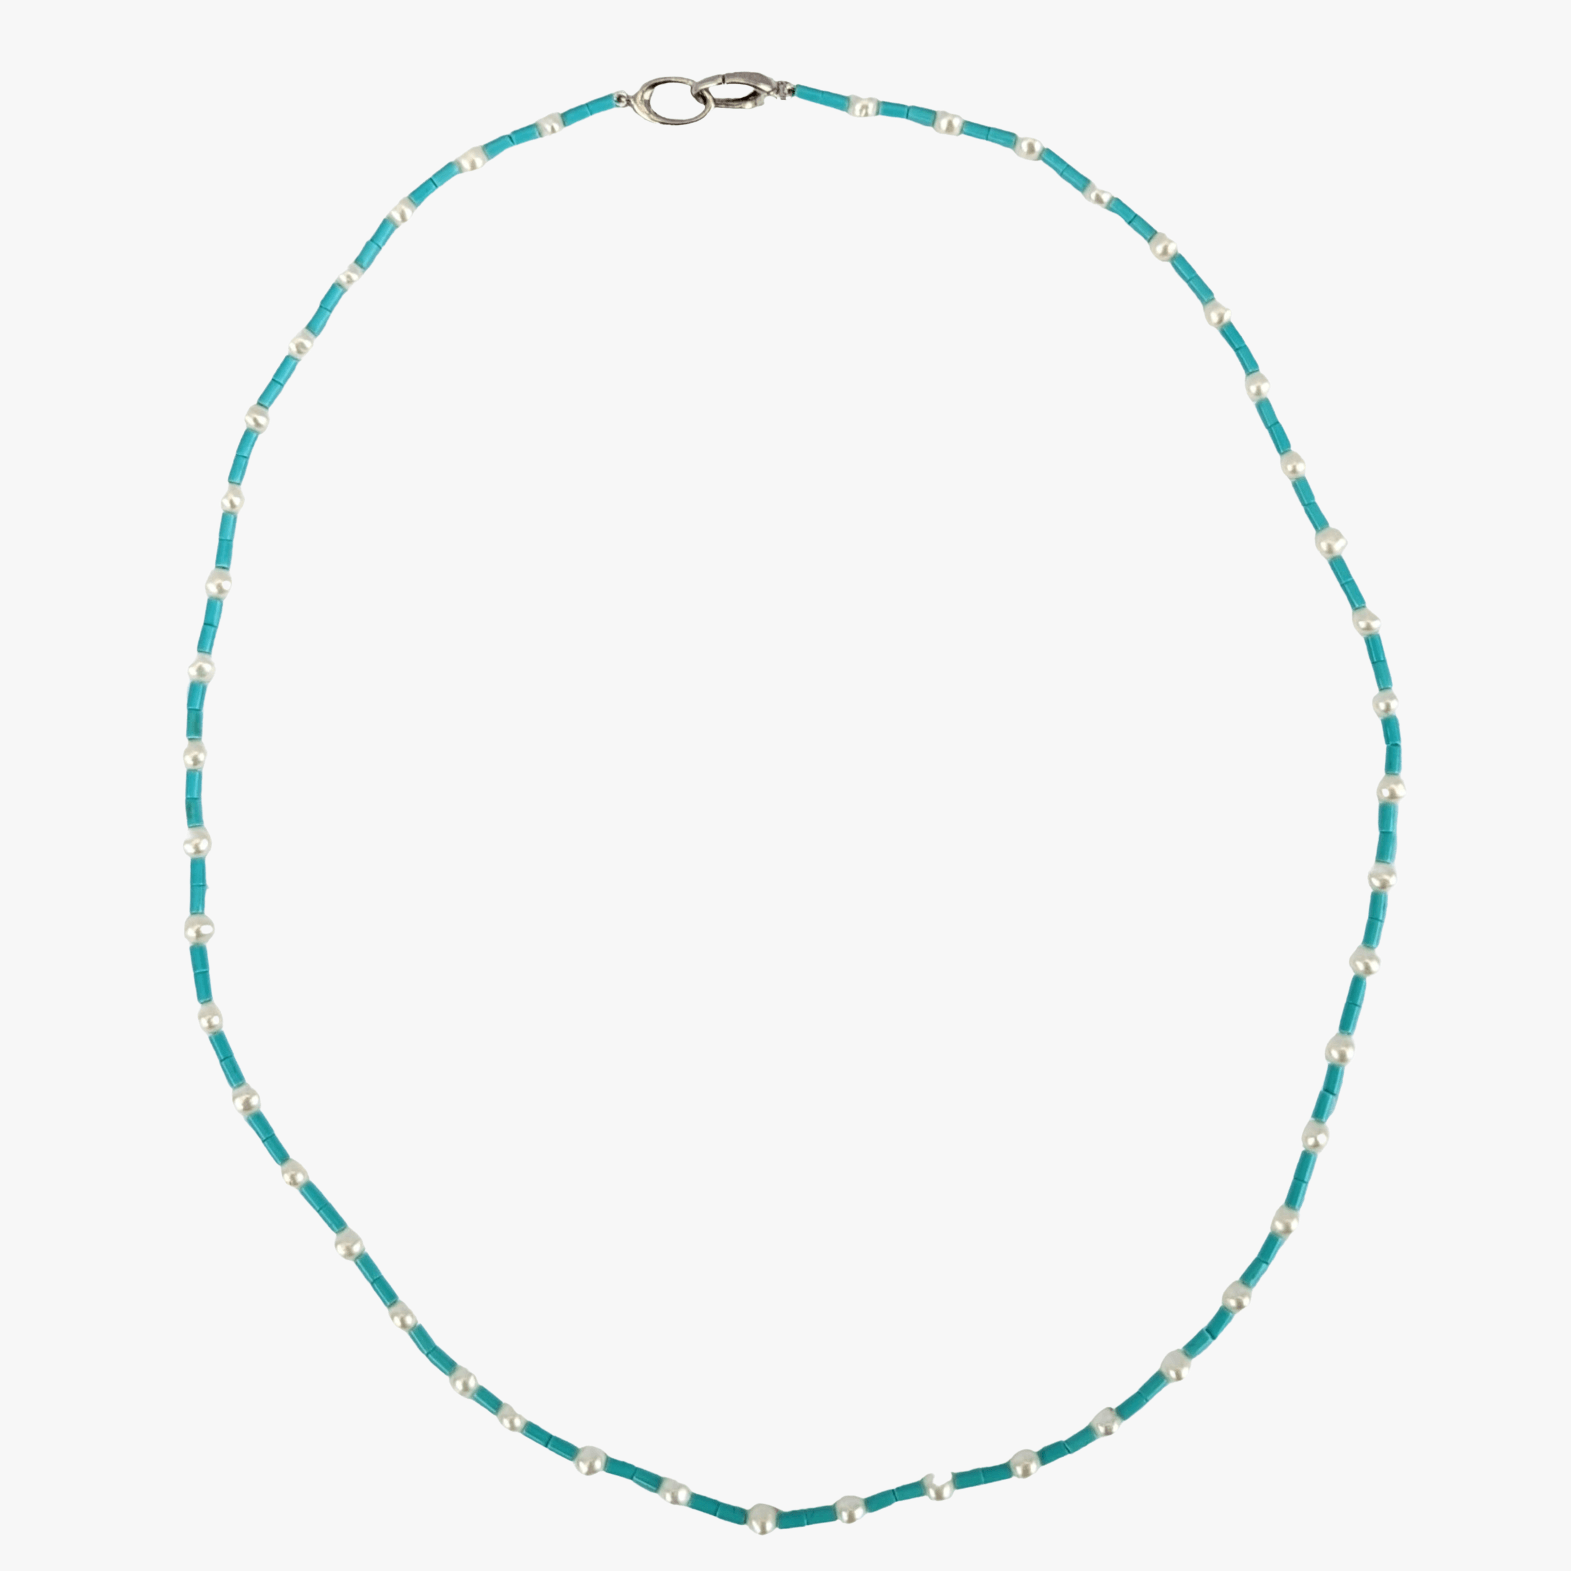 4.0-4.5mm White Freshwater Pearls and Turquoise Necklace - Marina Korneev Fine Pearls